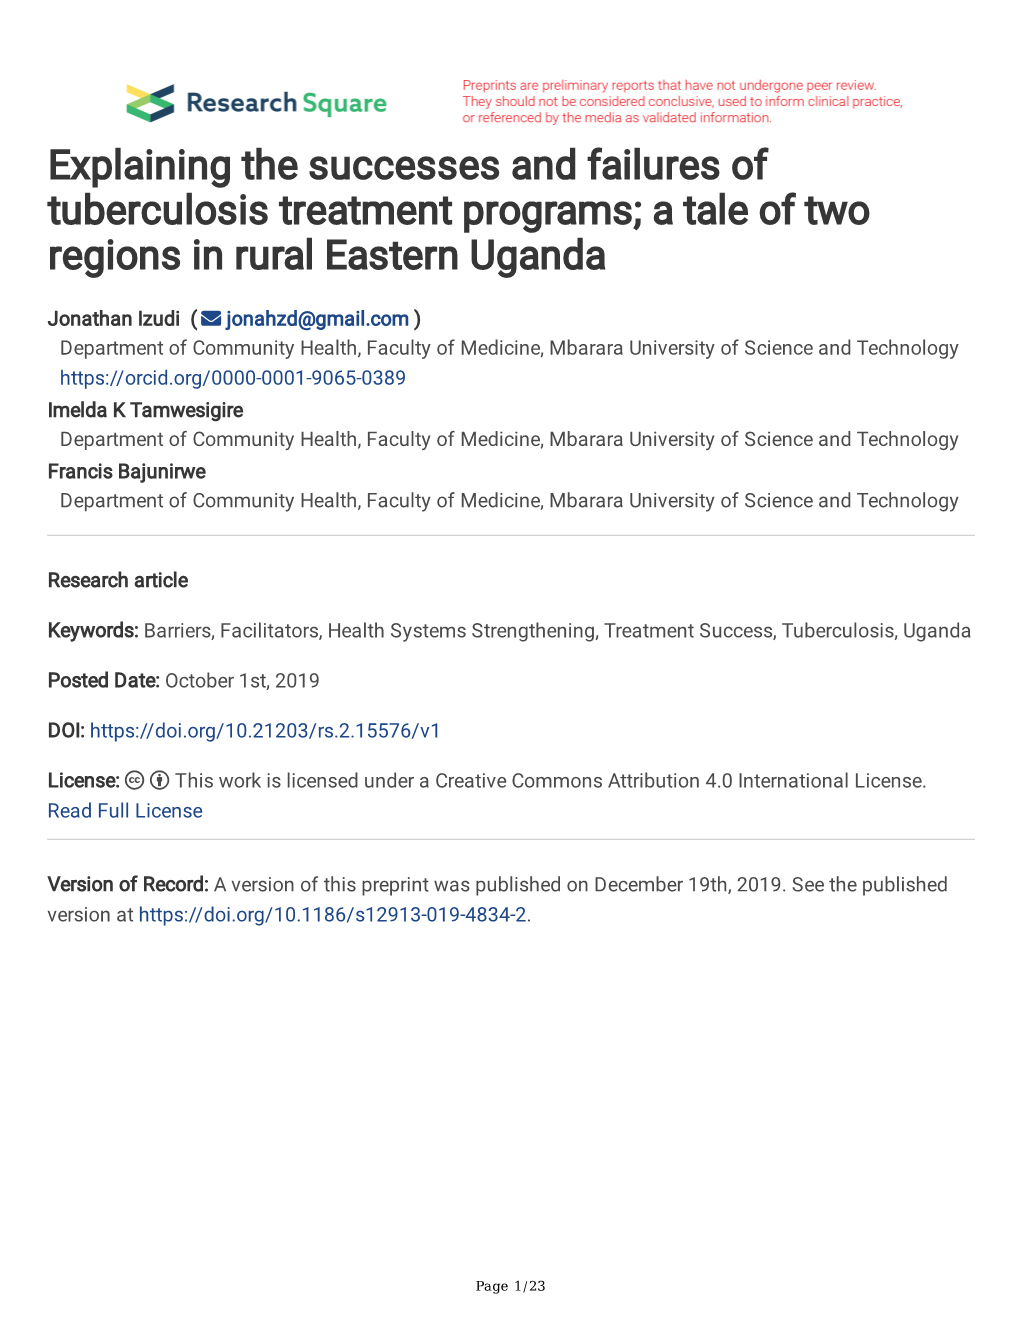 Explaining the Successes and Failures of Tuberculosis Treatment Programs; a Tale of Two Regions in Rural Eastern Uganda